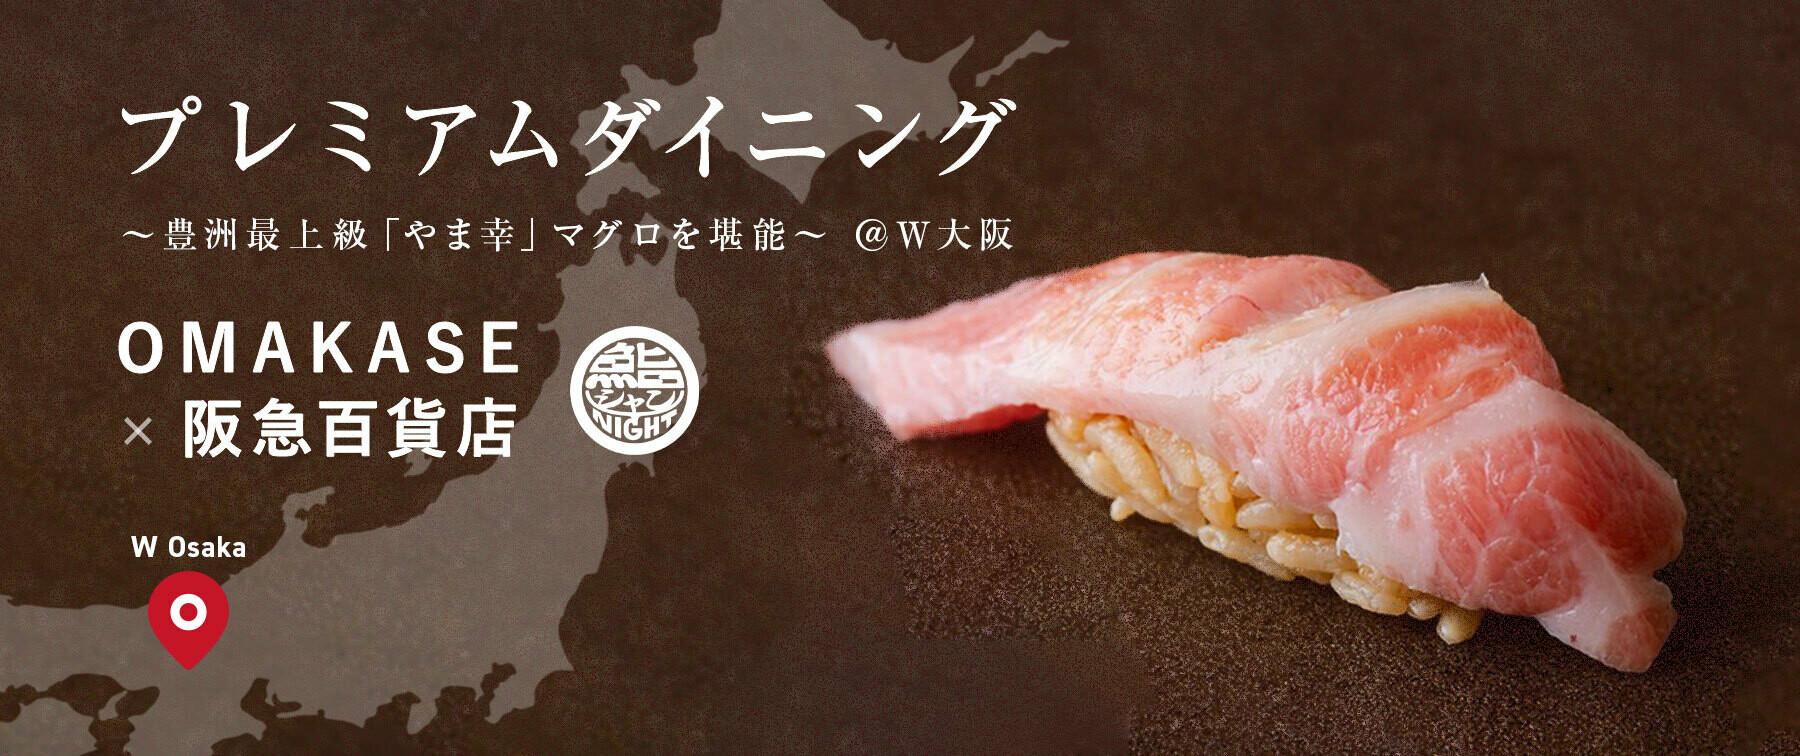 【Acceptance of applications closed】OMAKASE x Hankyu Department Store Premium Dining's image